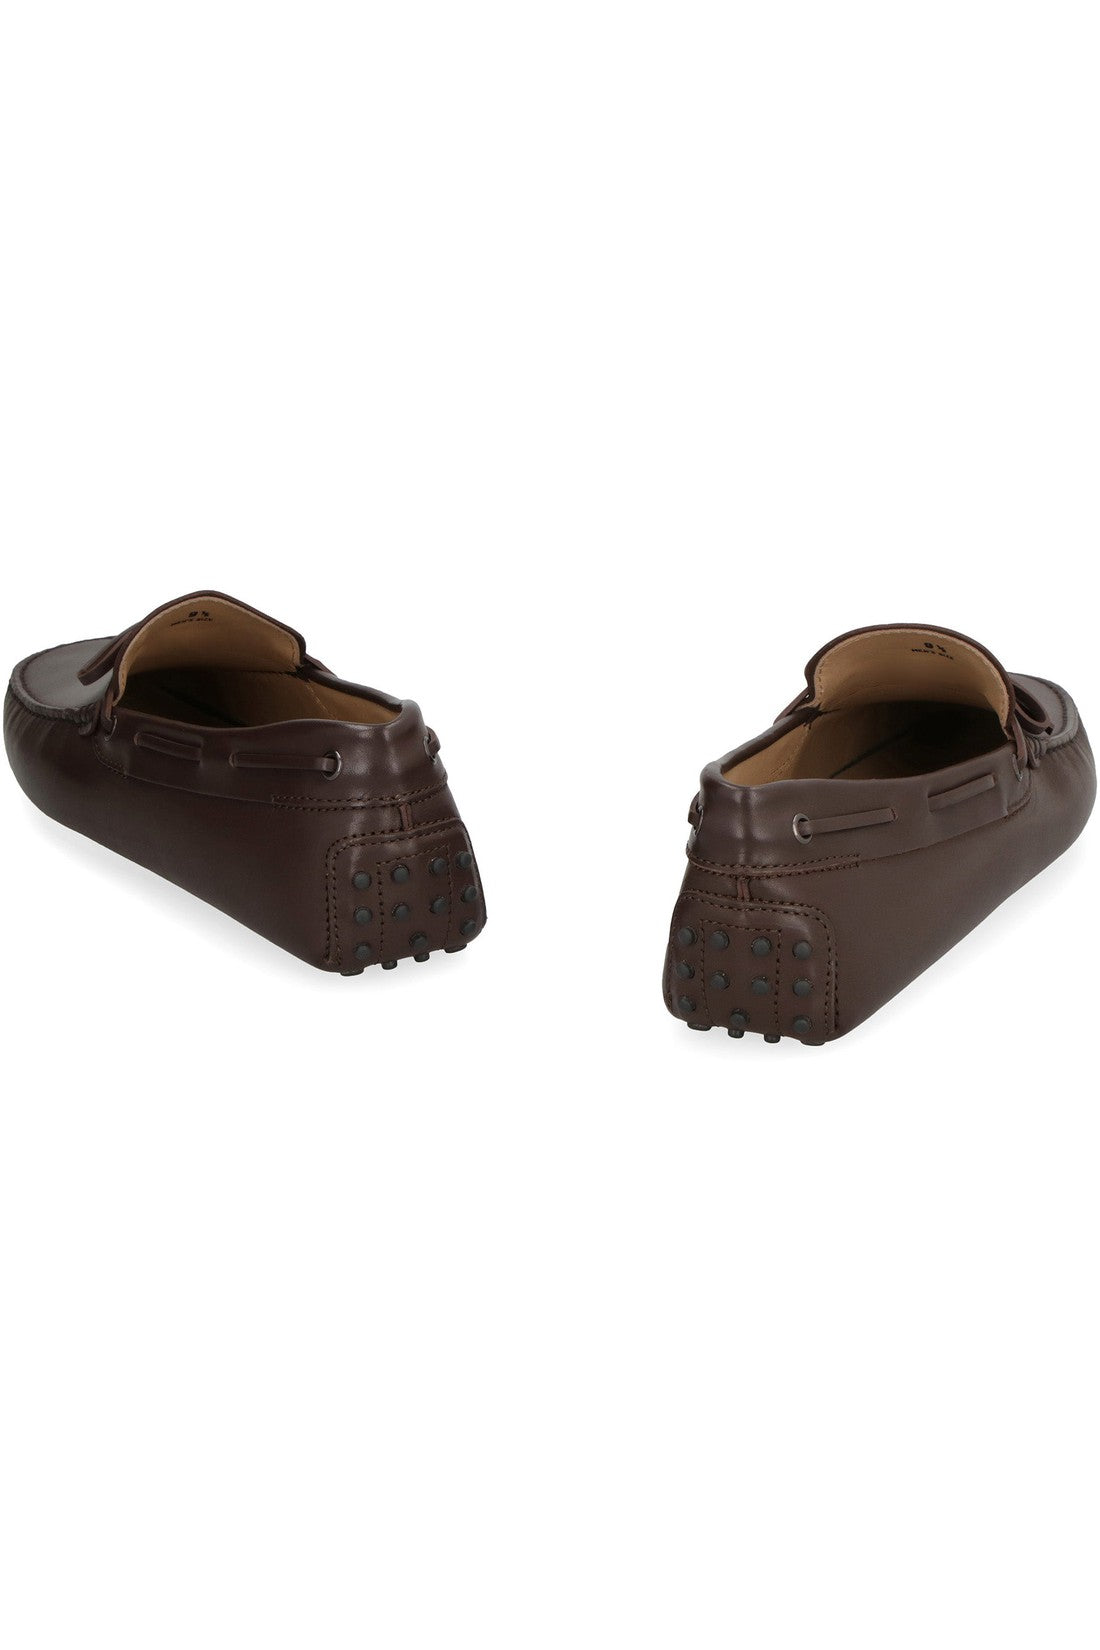 Tod's-OUTLET-SALE-Gommino calfskin loafers-ARCHIVIST